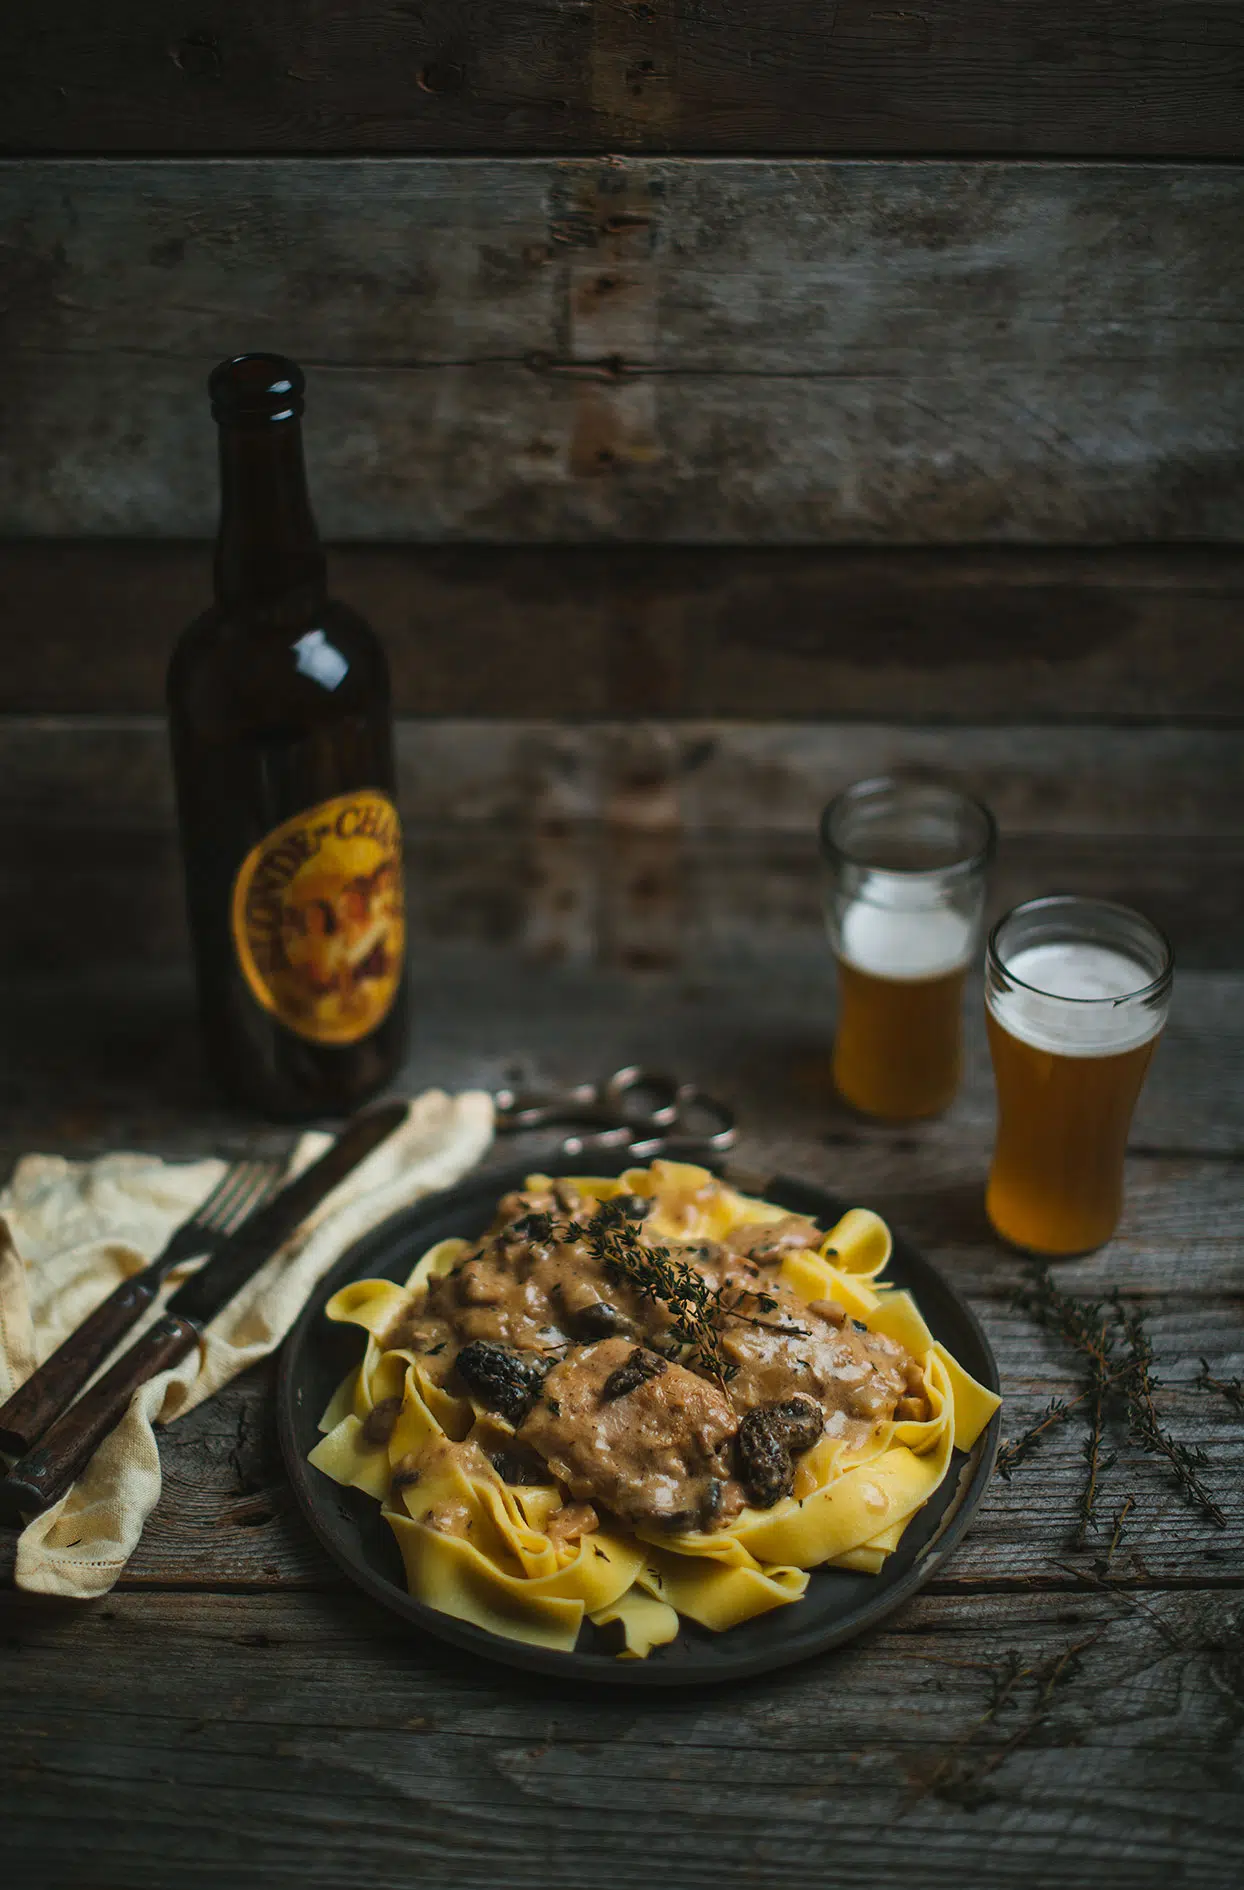 Chicken with mustard, mushrooms and beer sauce